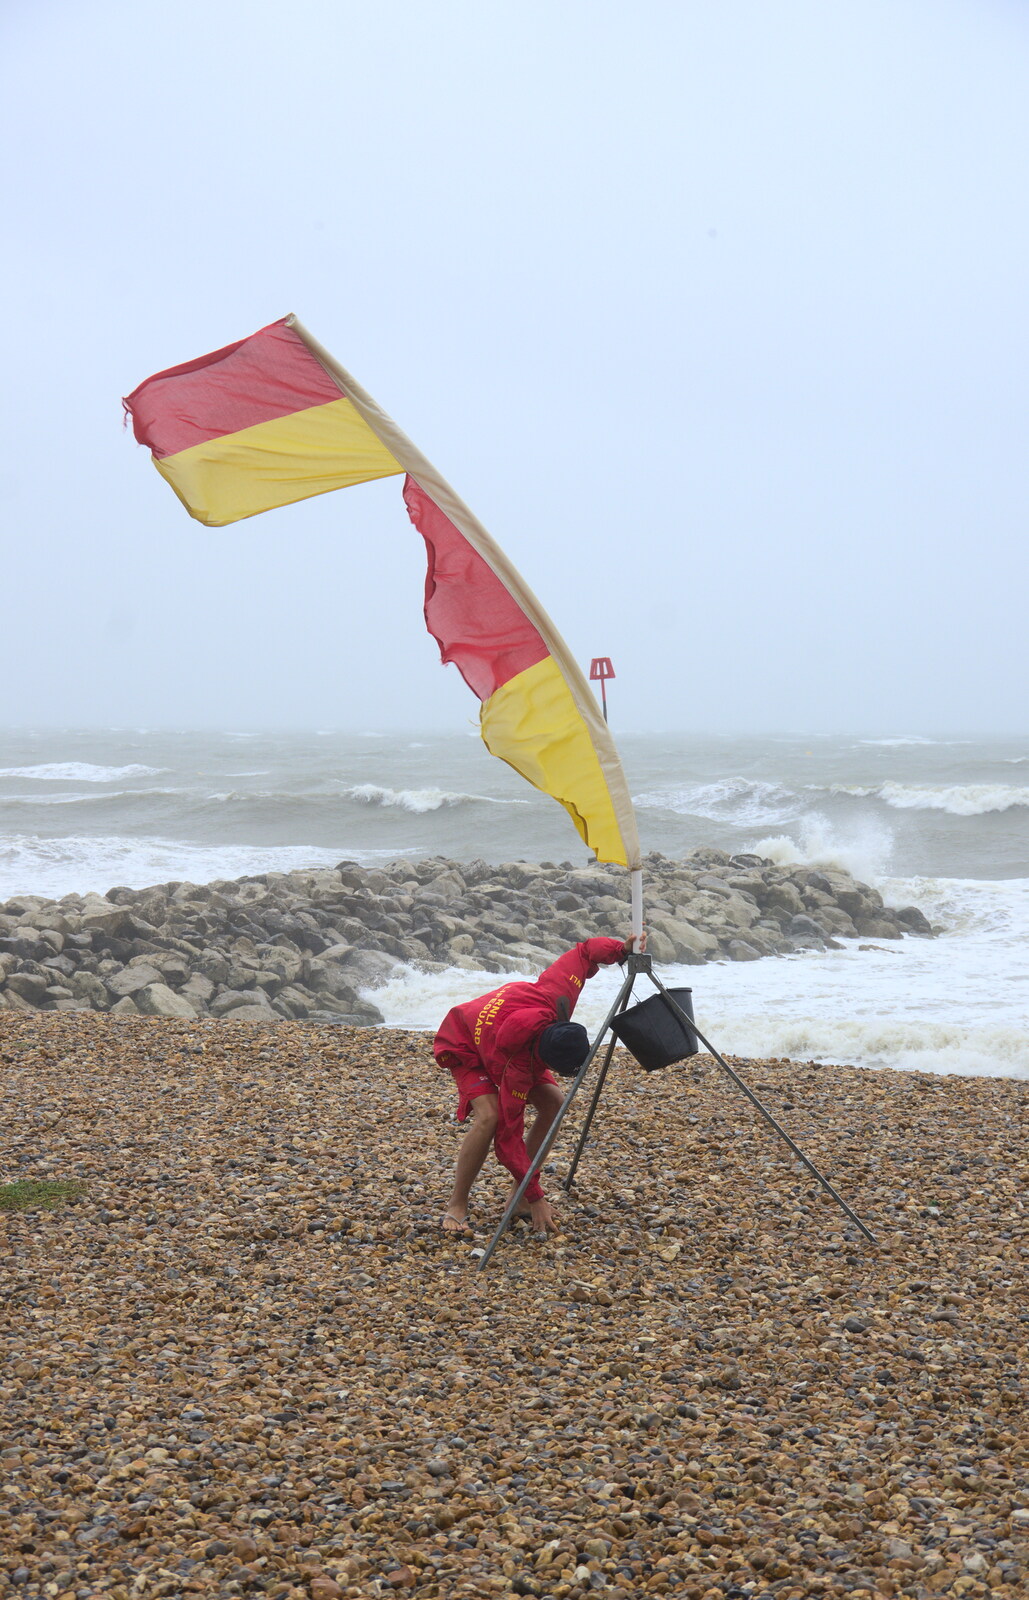 The lifeguard puts the flag back up from Blustery Beach Trips, Walkford and Highcliffe, Dorset - 29th July 2018